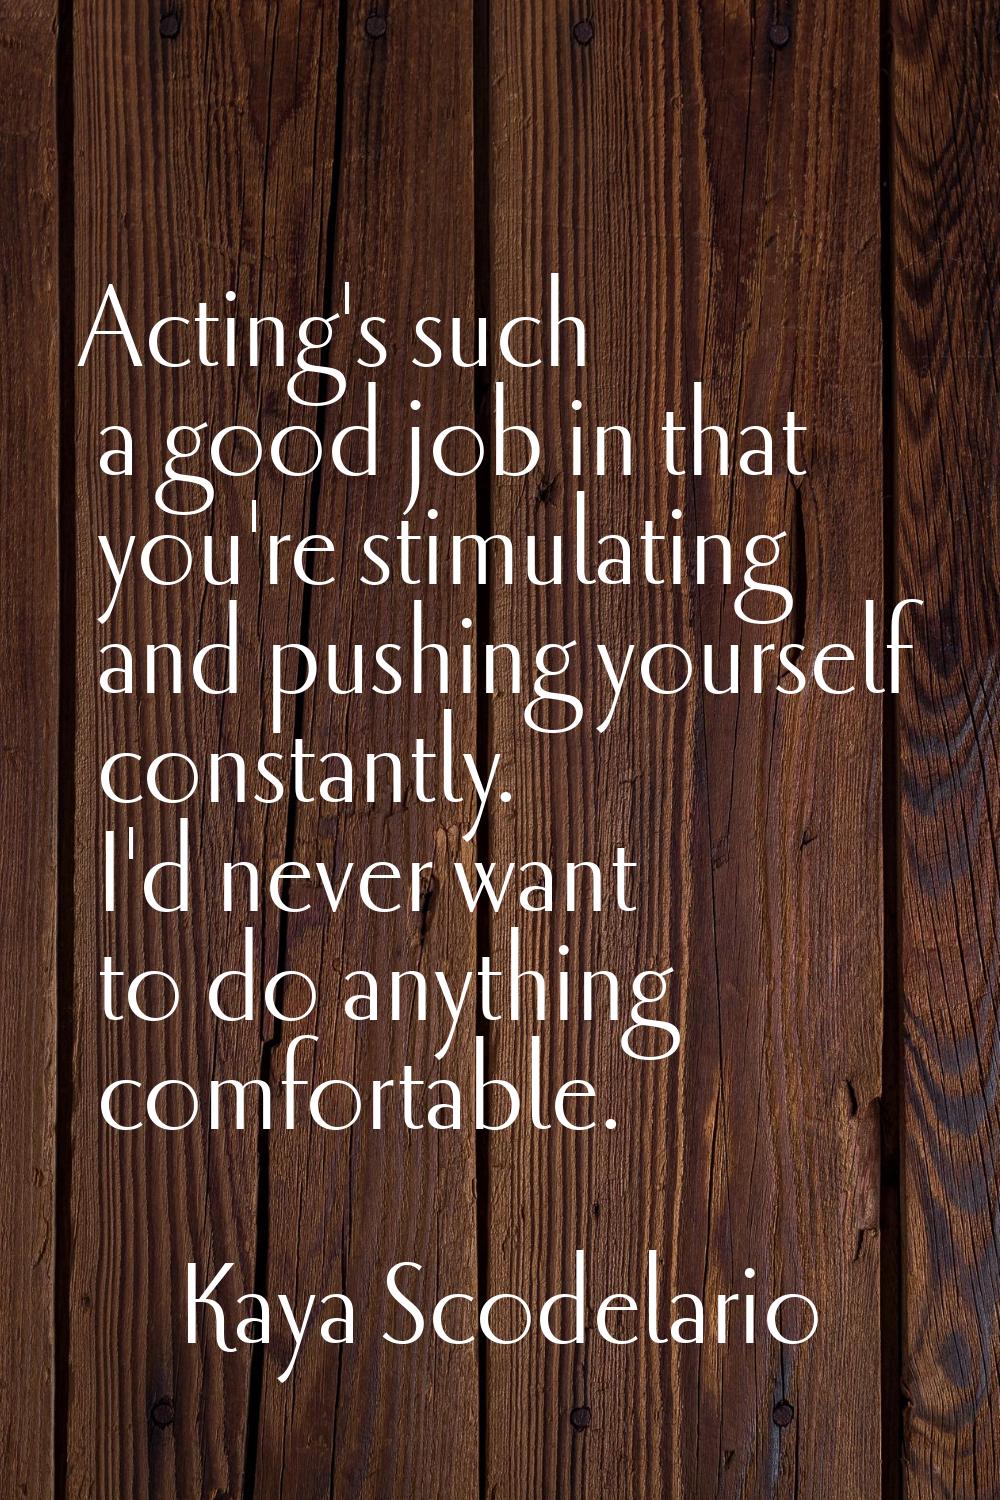 Acting's such a good job in that you're stimulating and pushing yourself constantly. I'd never want